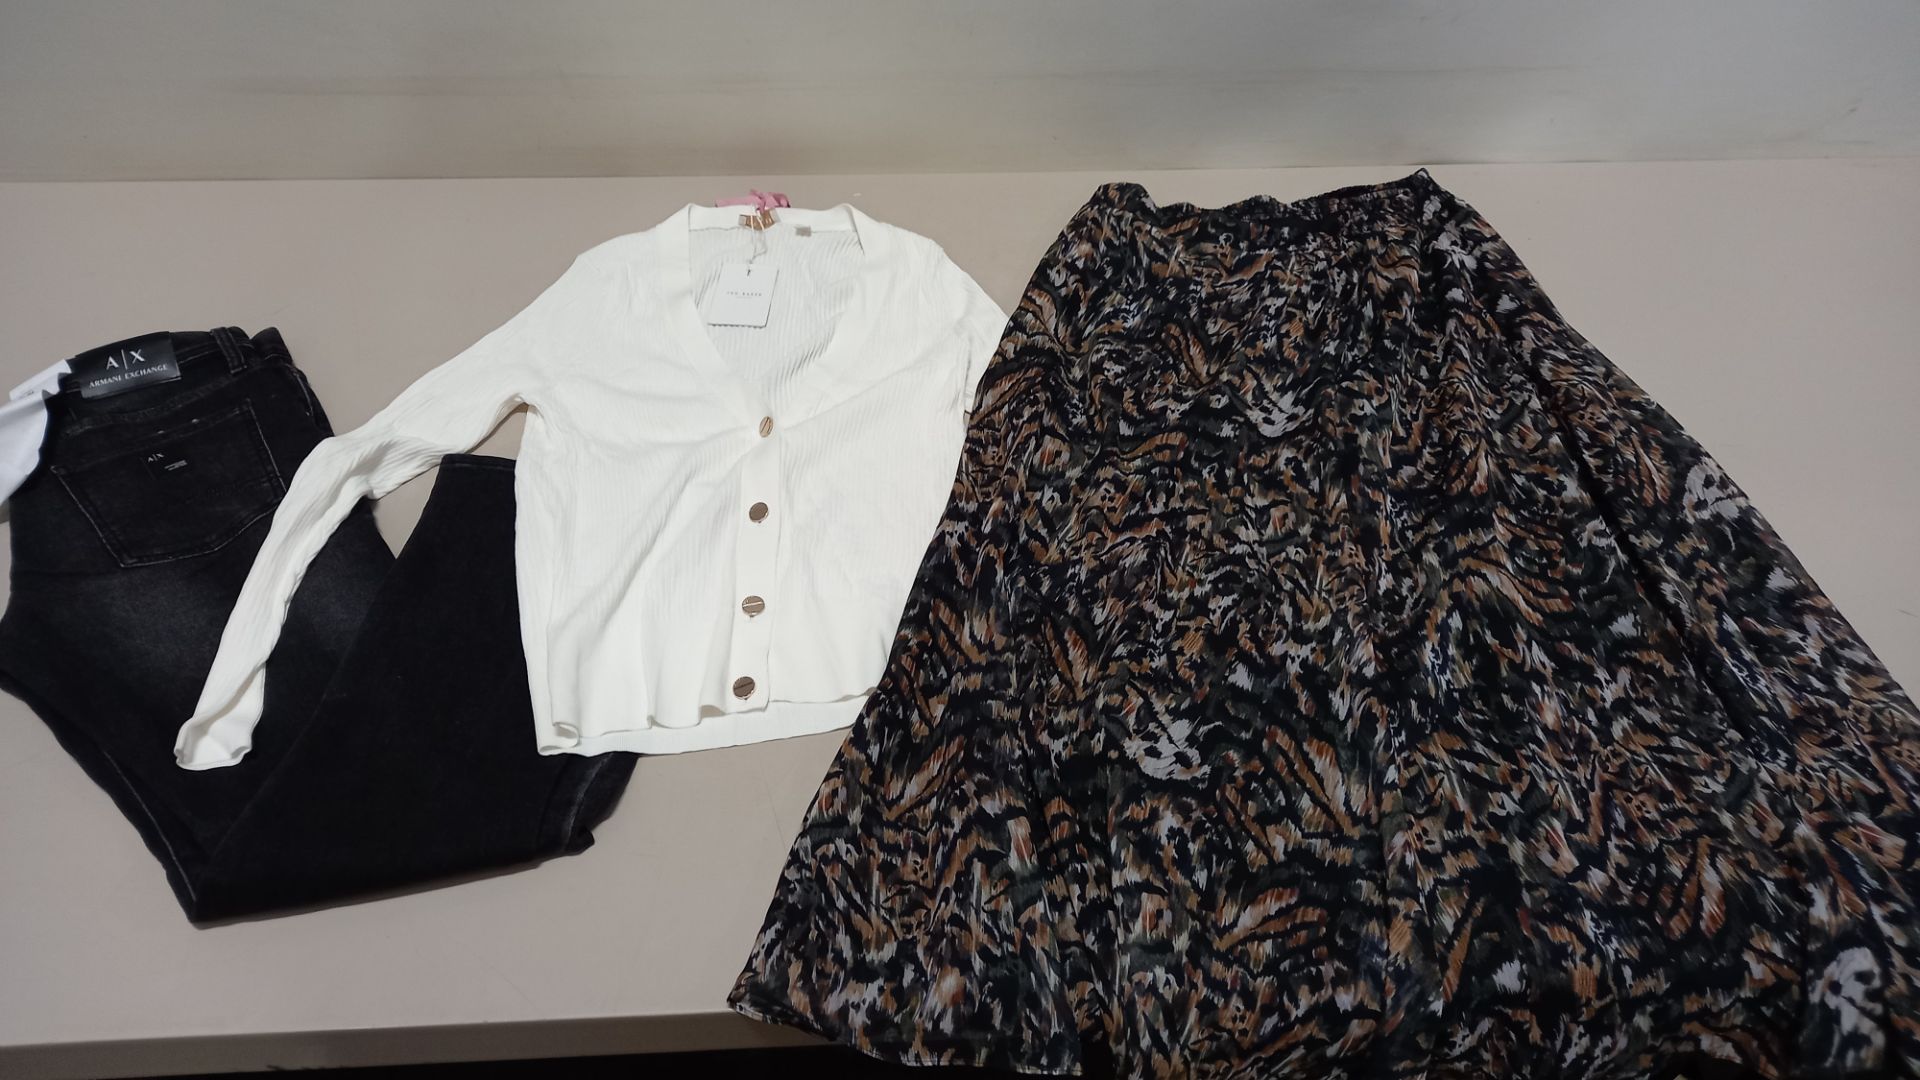 6 PIECE MIXED CLOTHING LOT CONTAINING FRENCH CONNECTION DRESS SIZE 10, TED BAKER CARDIGAN SIZE 4,